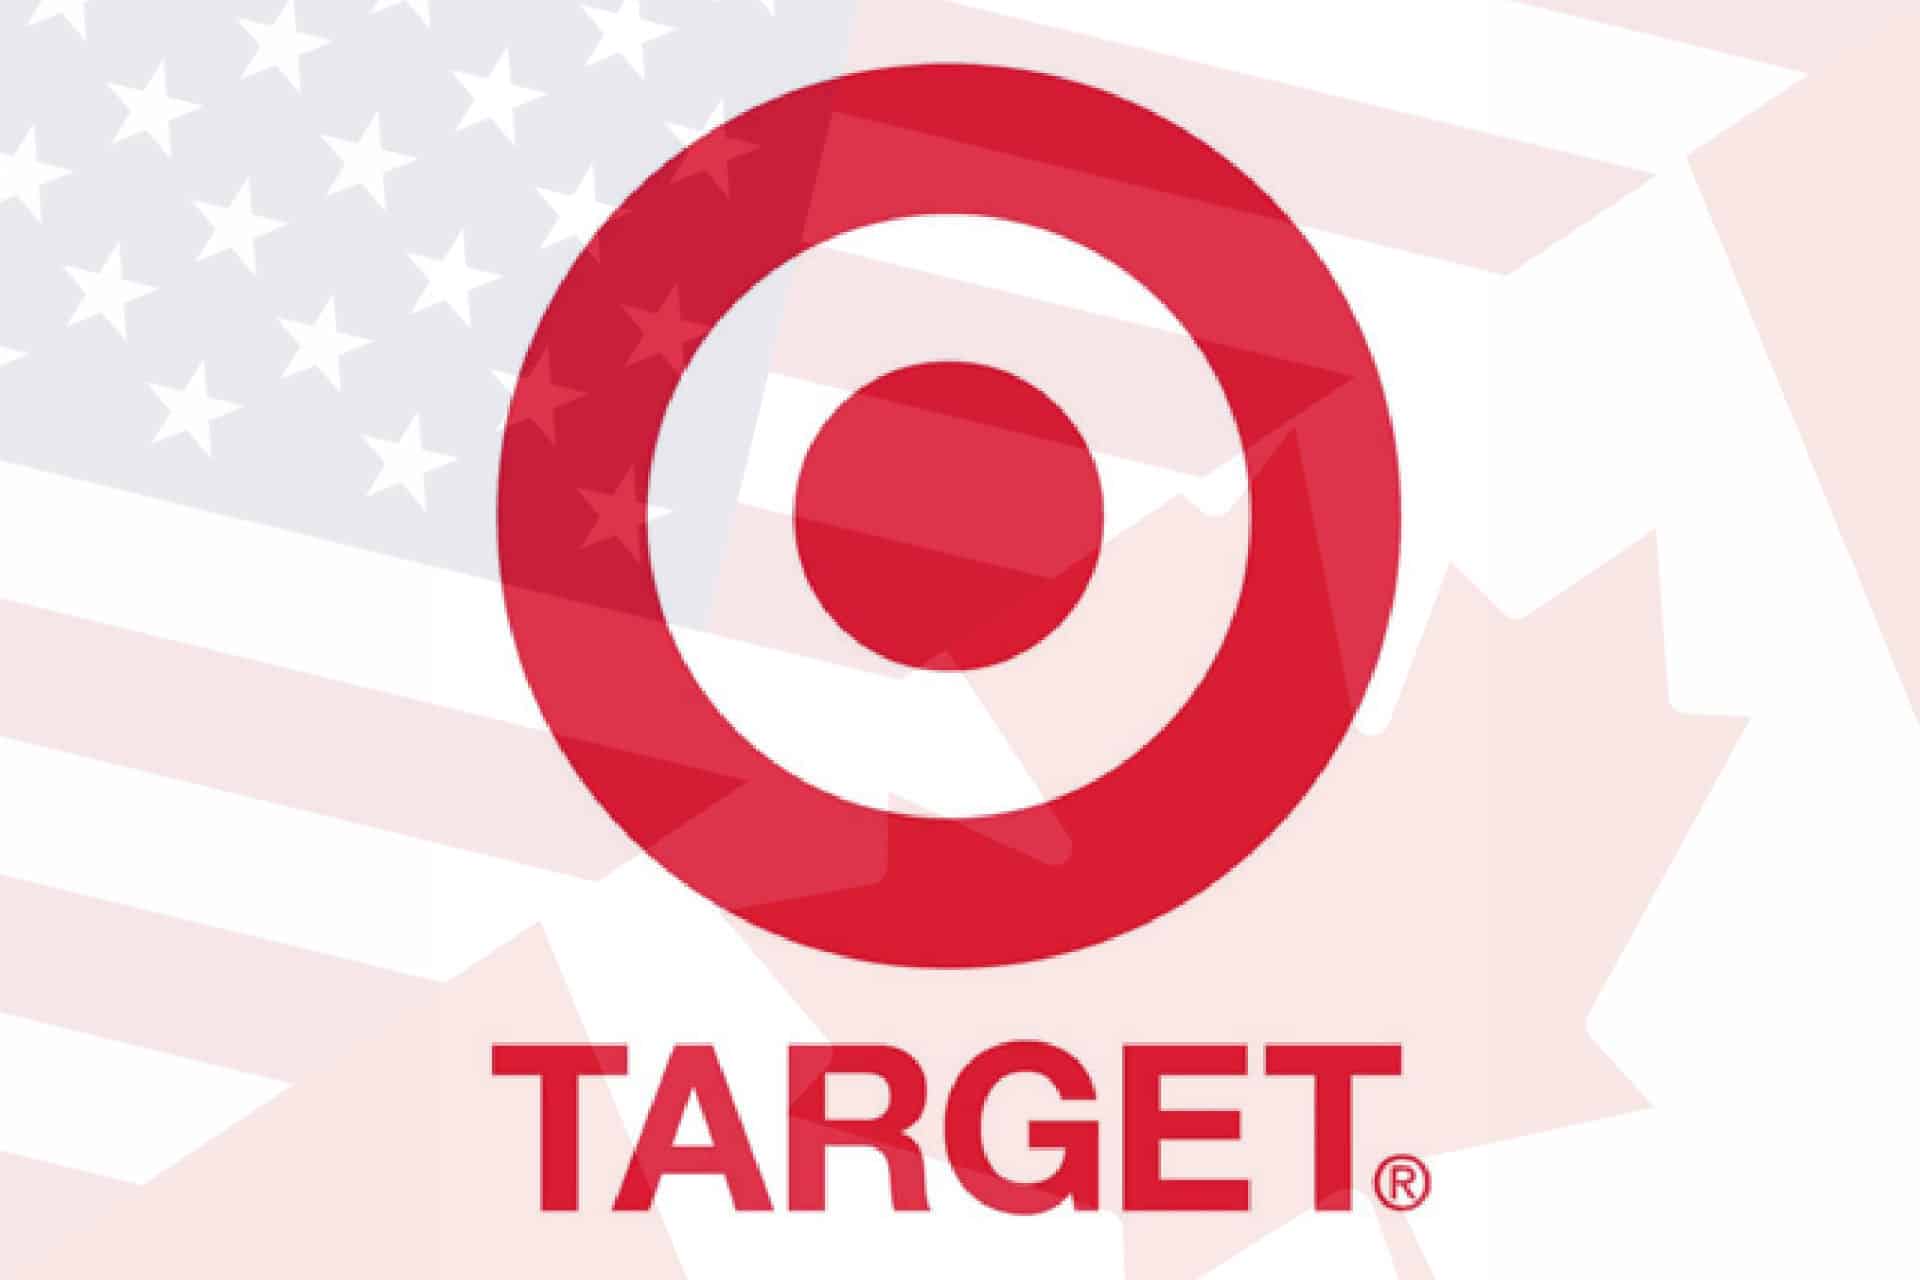 The Target logo over the flags of USA and Canada